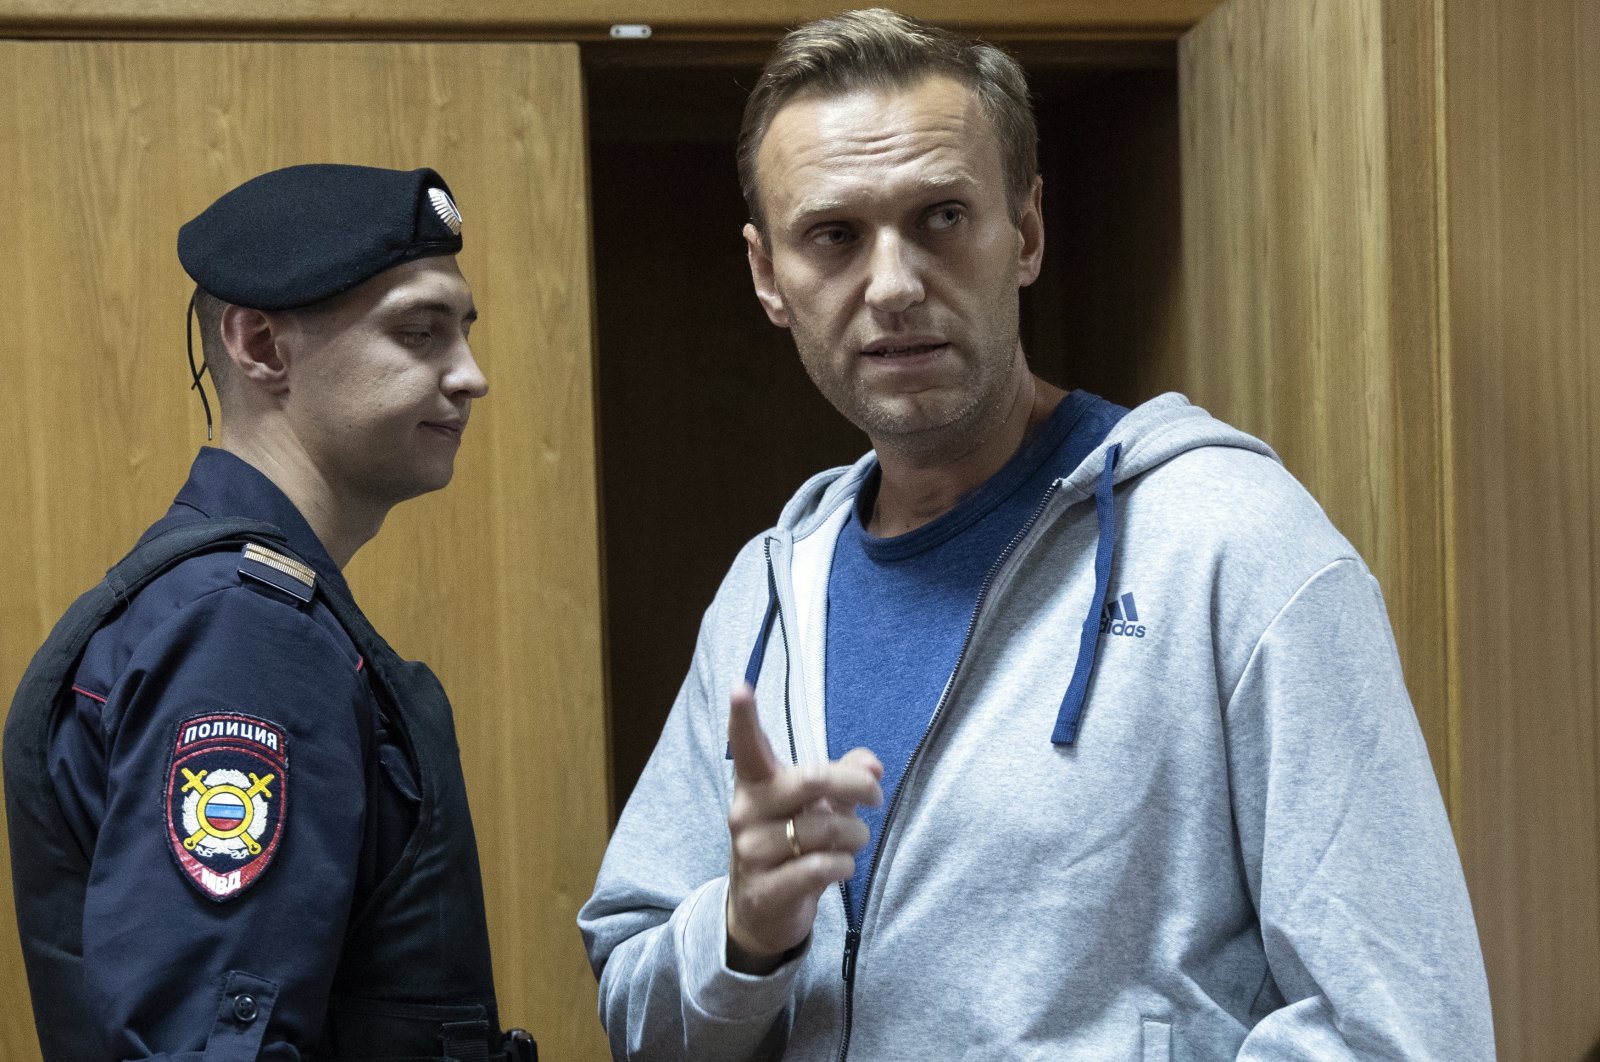 Russian opposition leader Alexei Navalny gestures while speaking in a courtroom in Moscow, Russia, Aug. 27, 2018. (AP Photo)